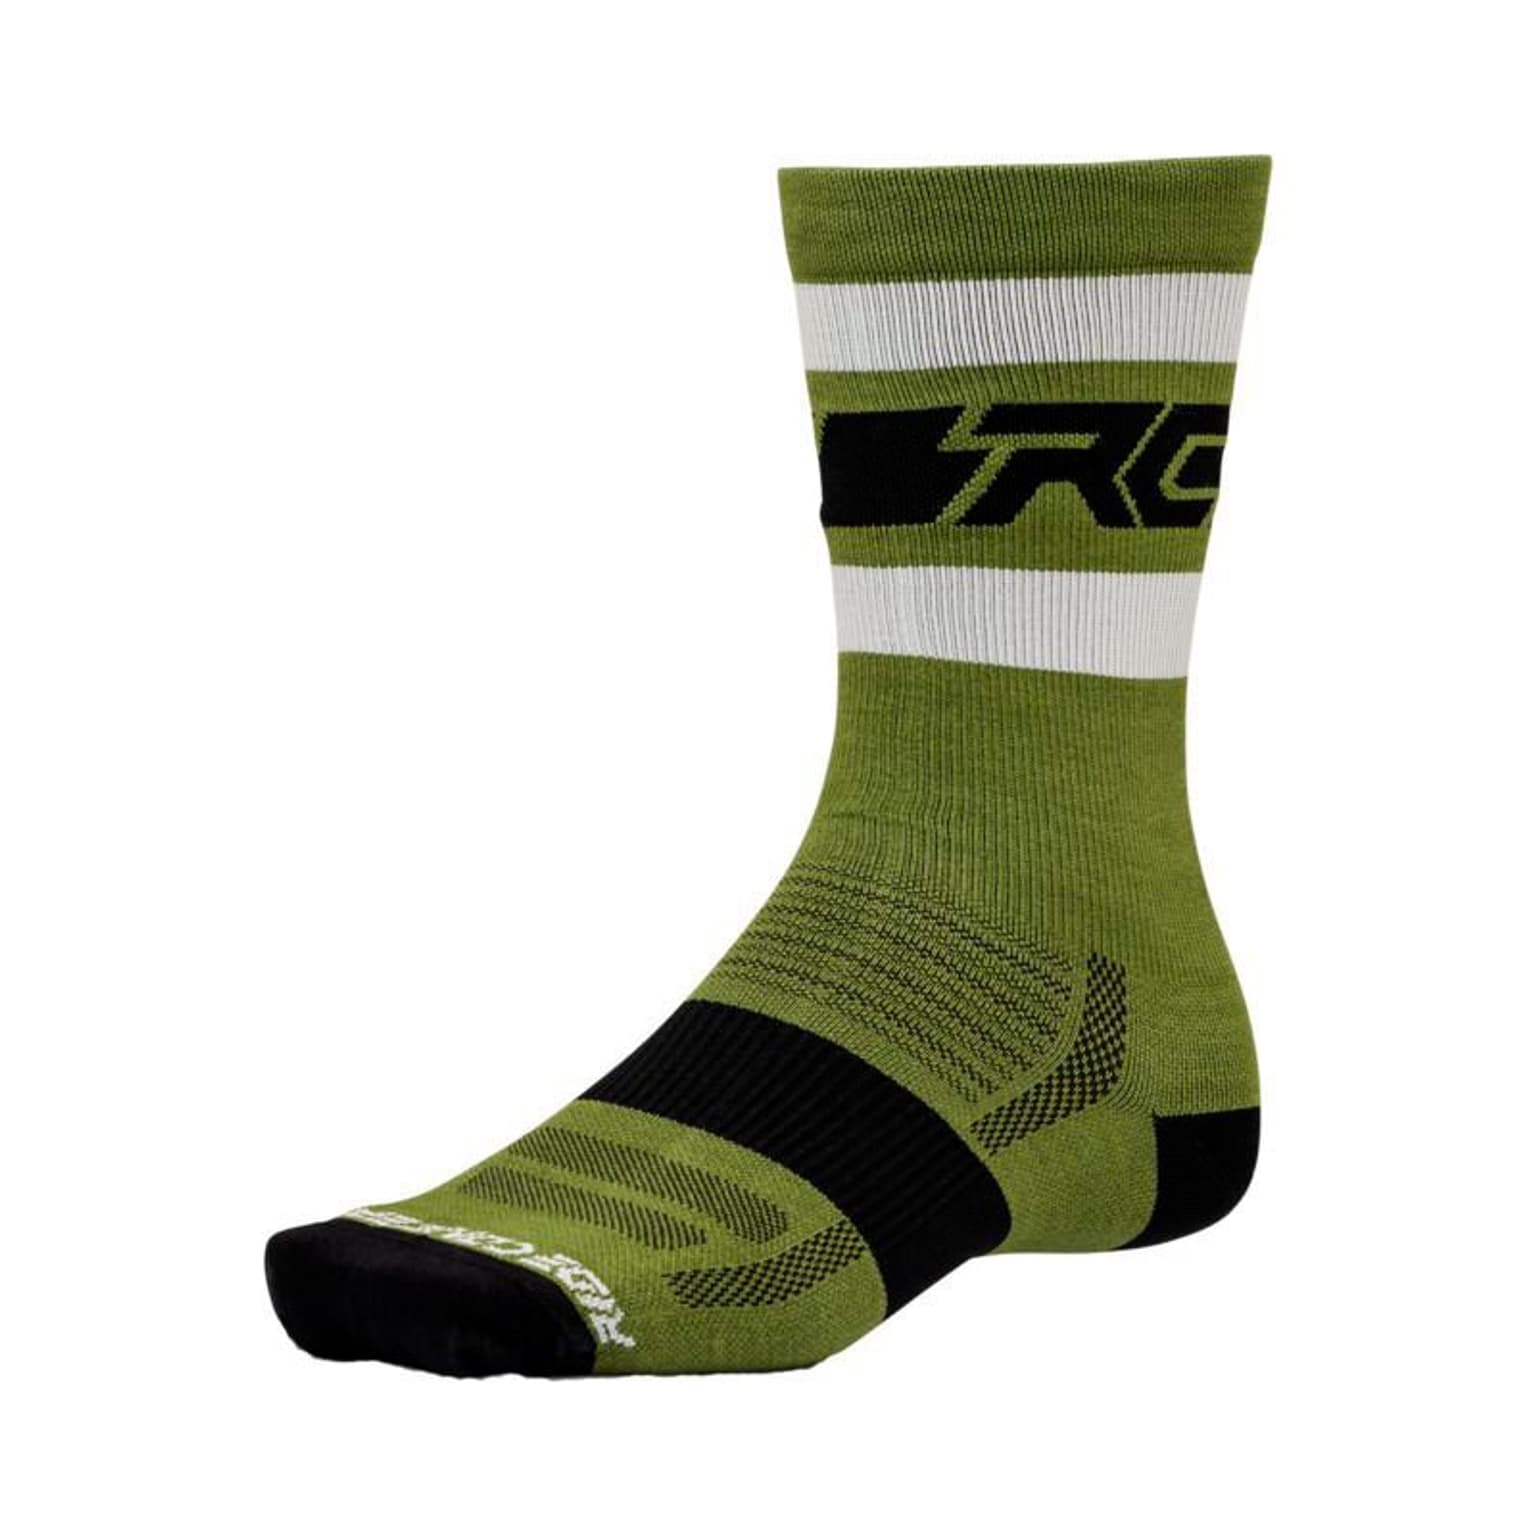 Ride Concepts Ride Concepts Woll Fifty-Fifty Velosocken vert-mousse 1